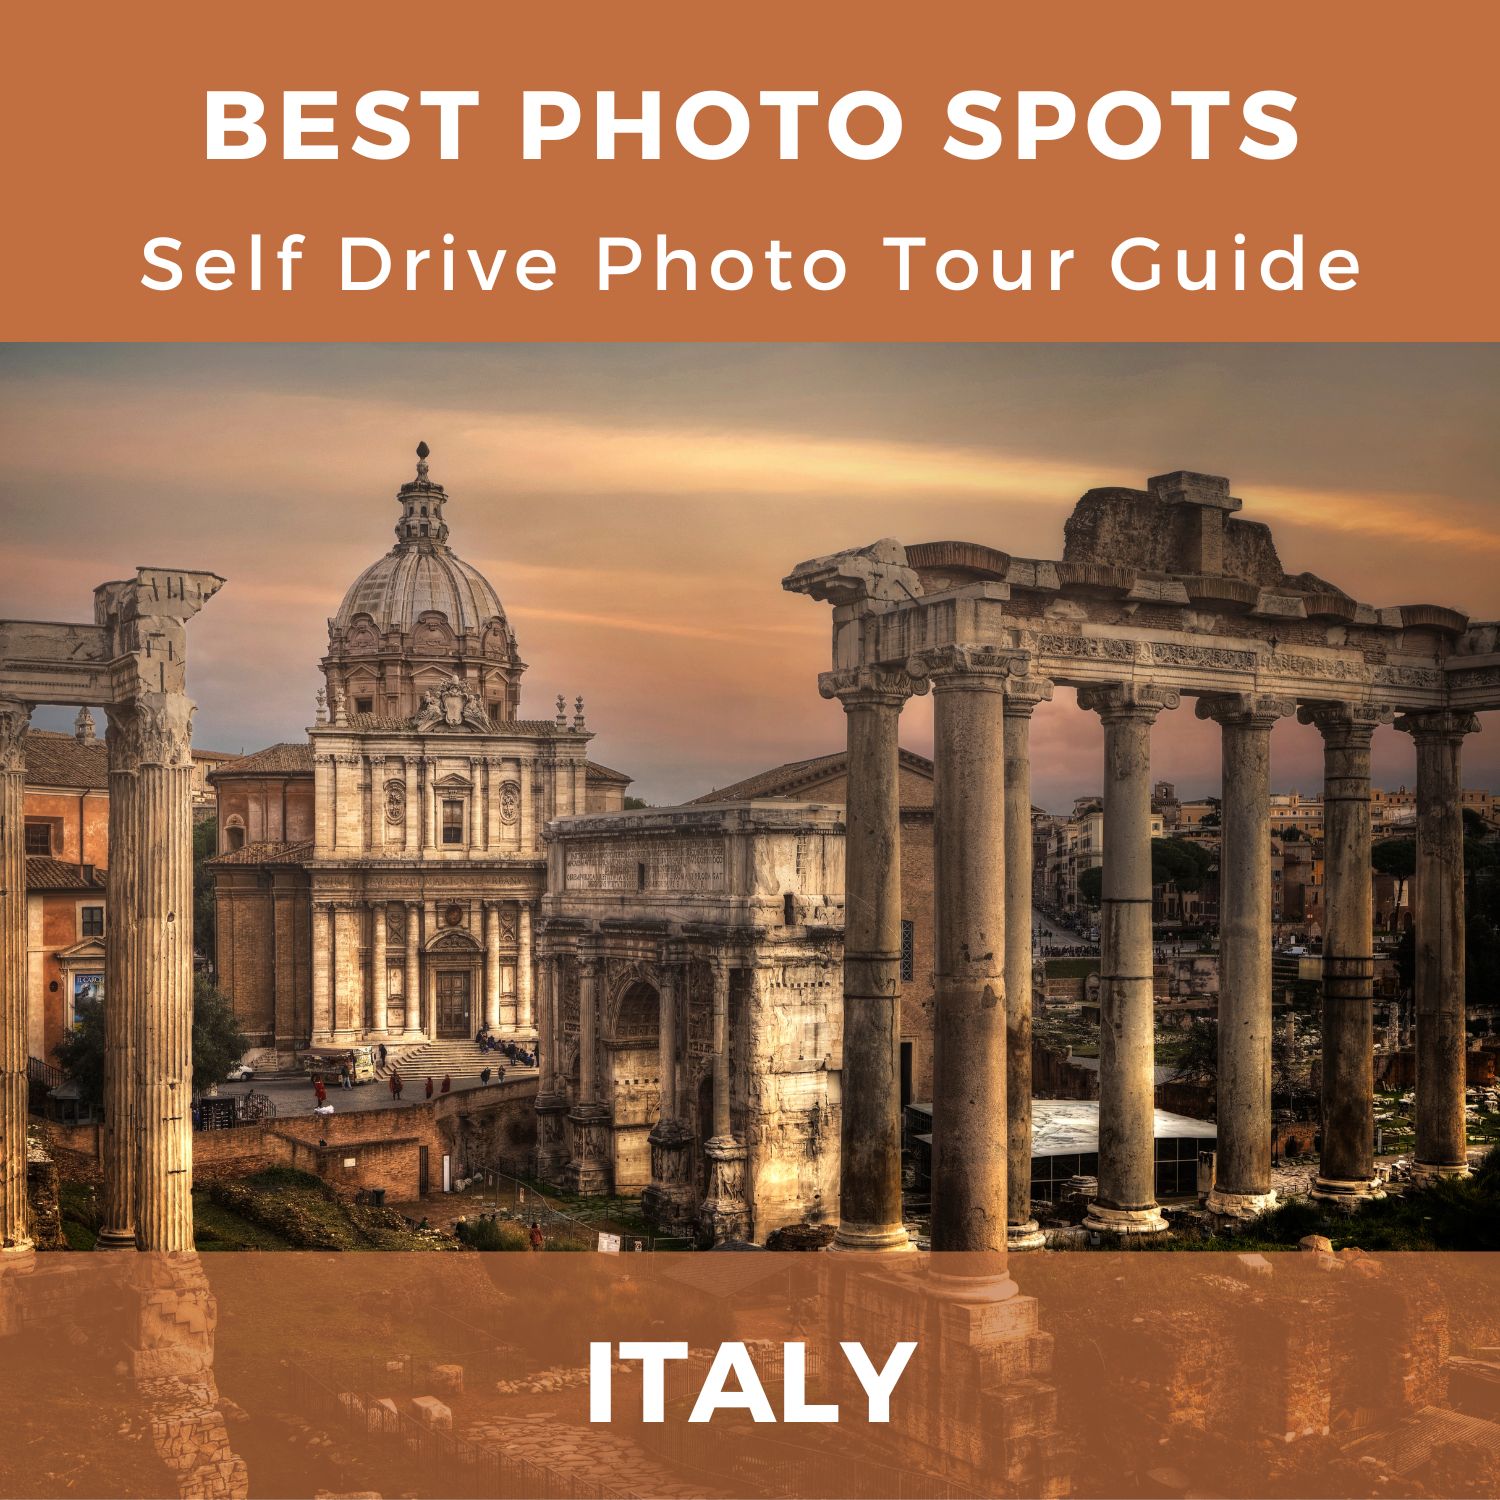 Italy Photo Tour Guide